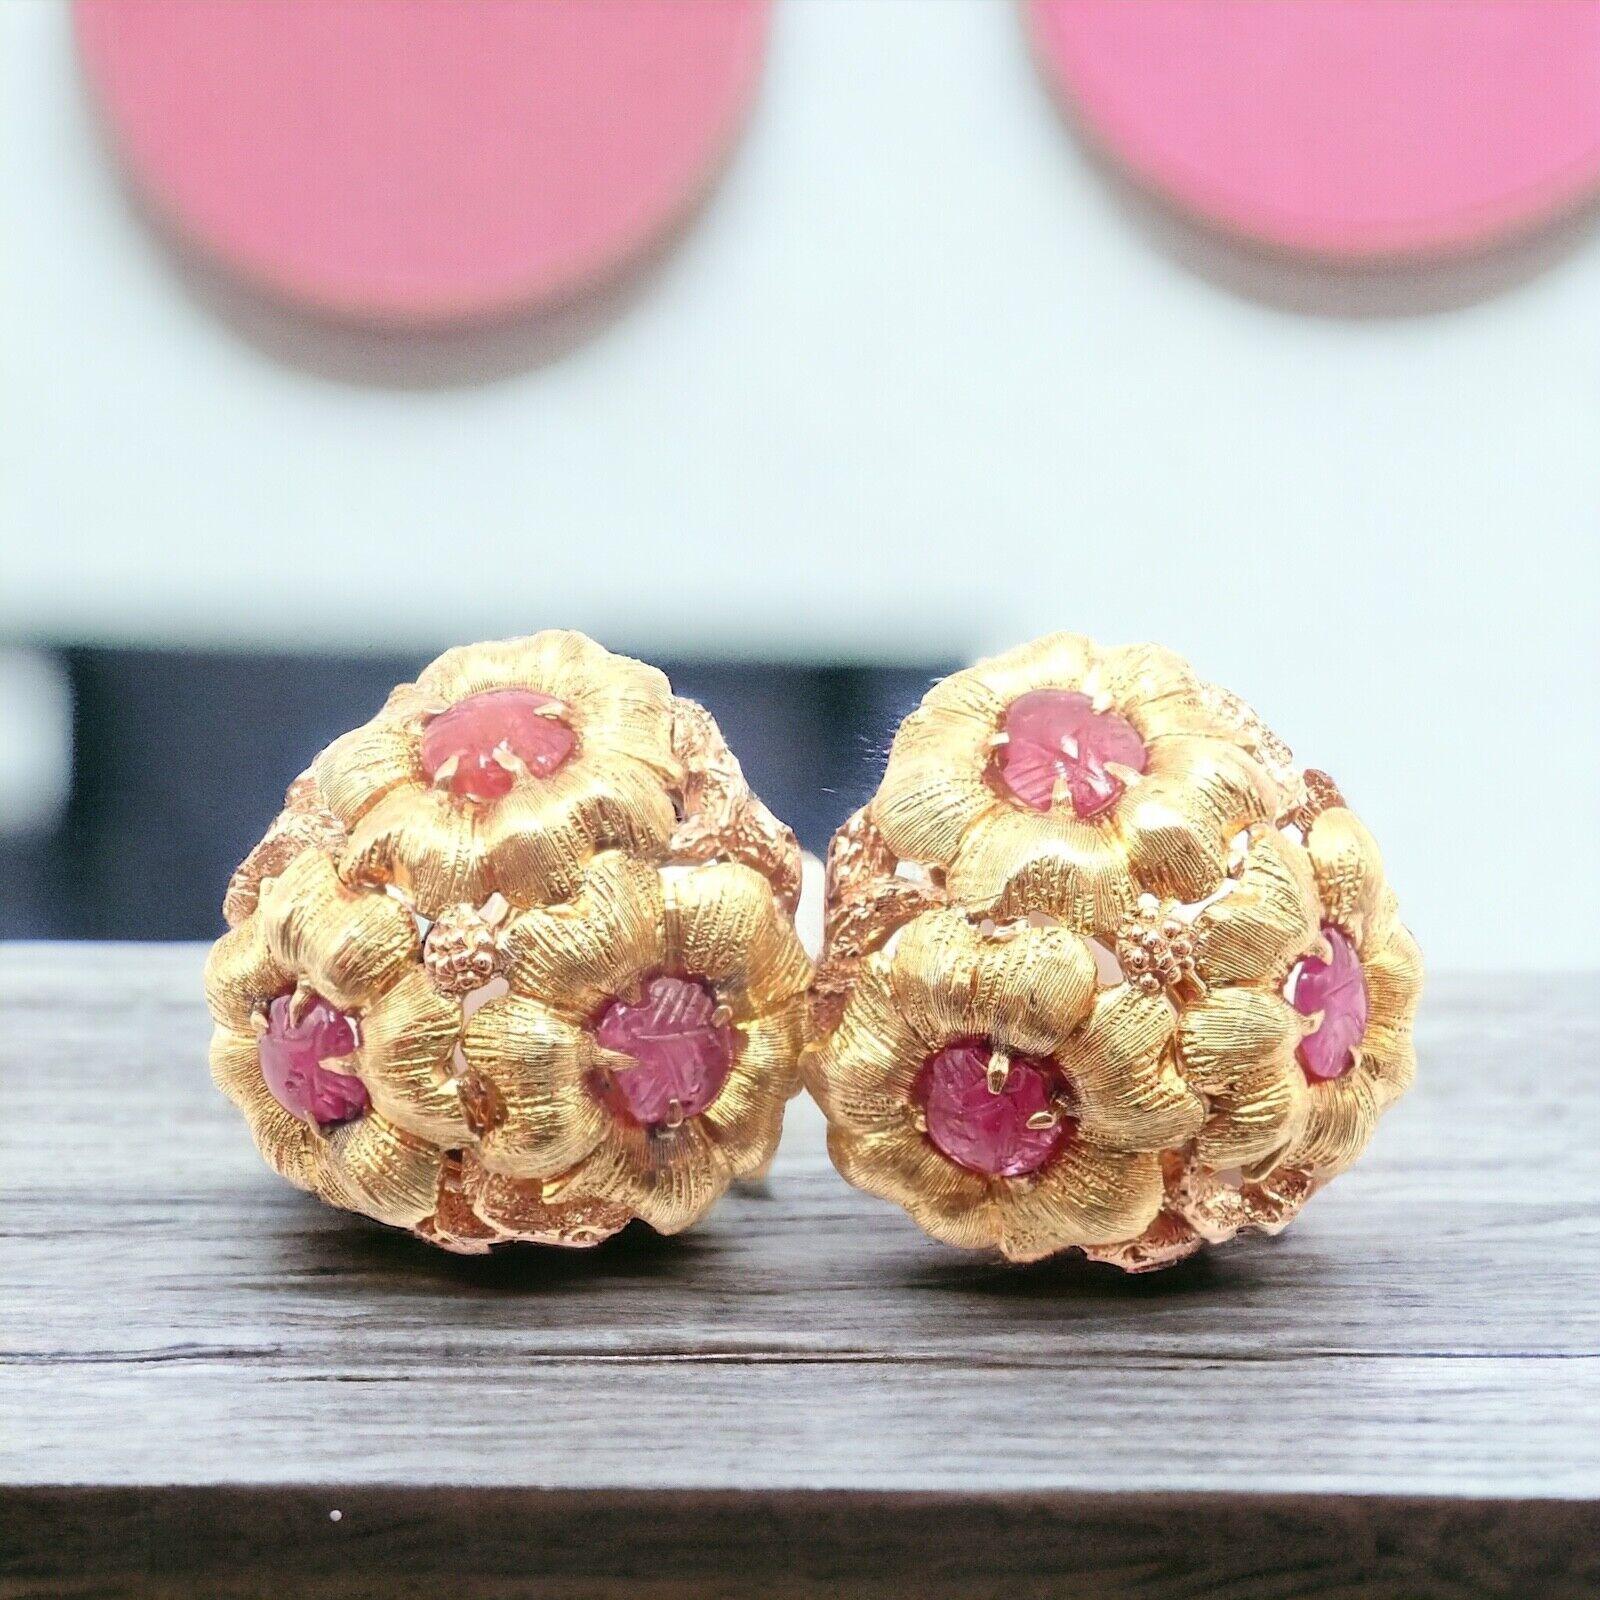 Uncut Vintage Buccellati Carved Ruby Flower Yellow Gold Earring For Sale